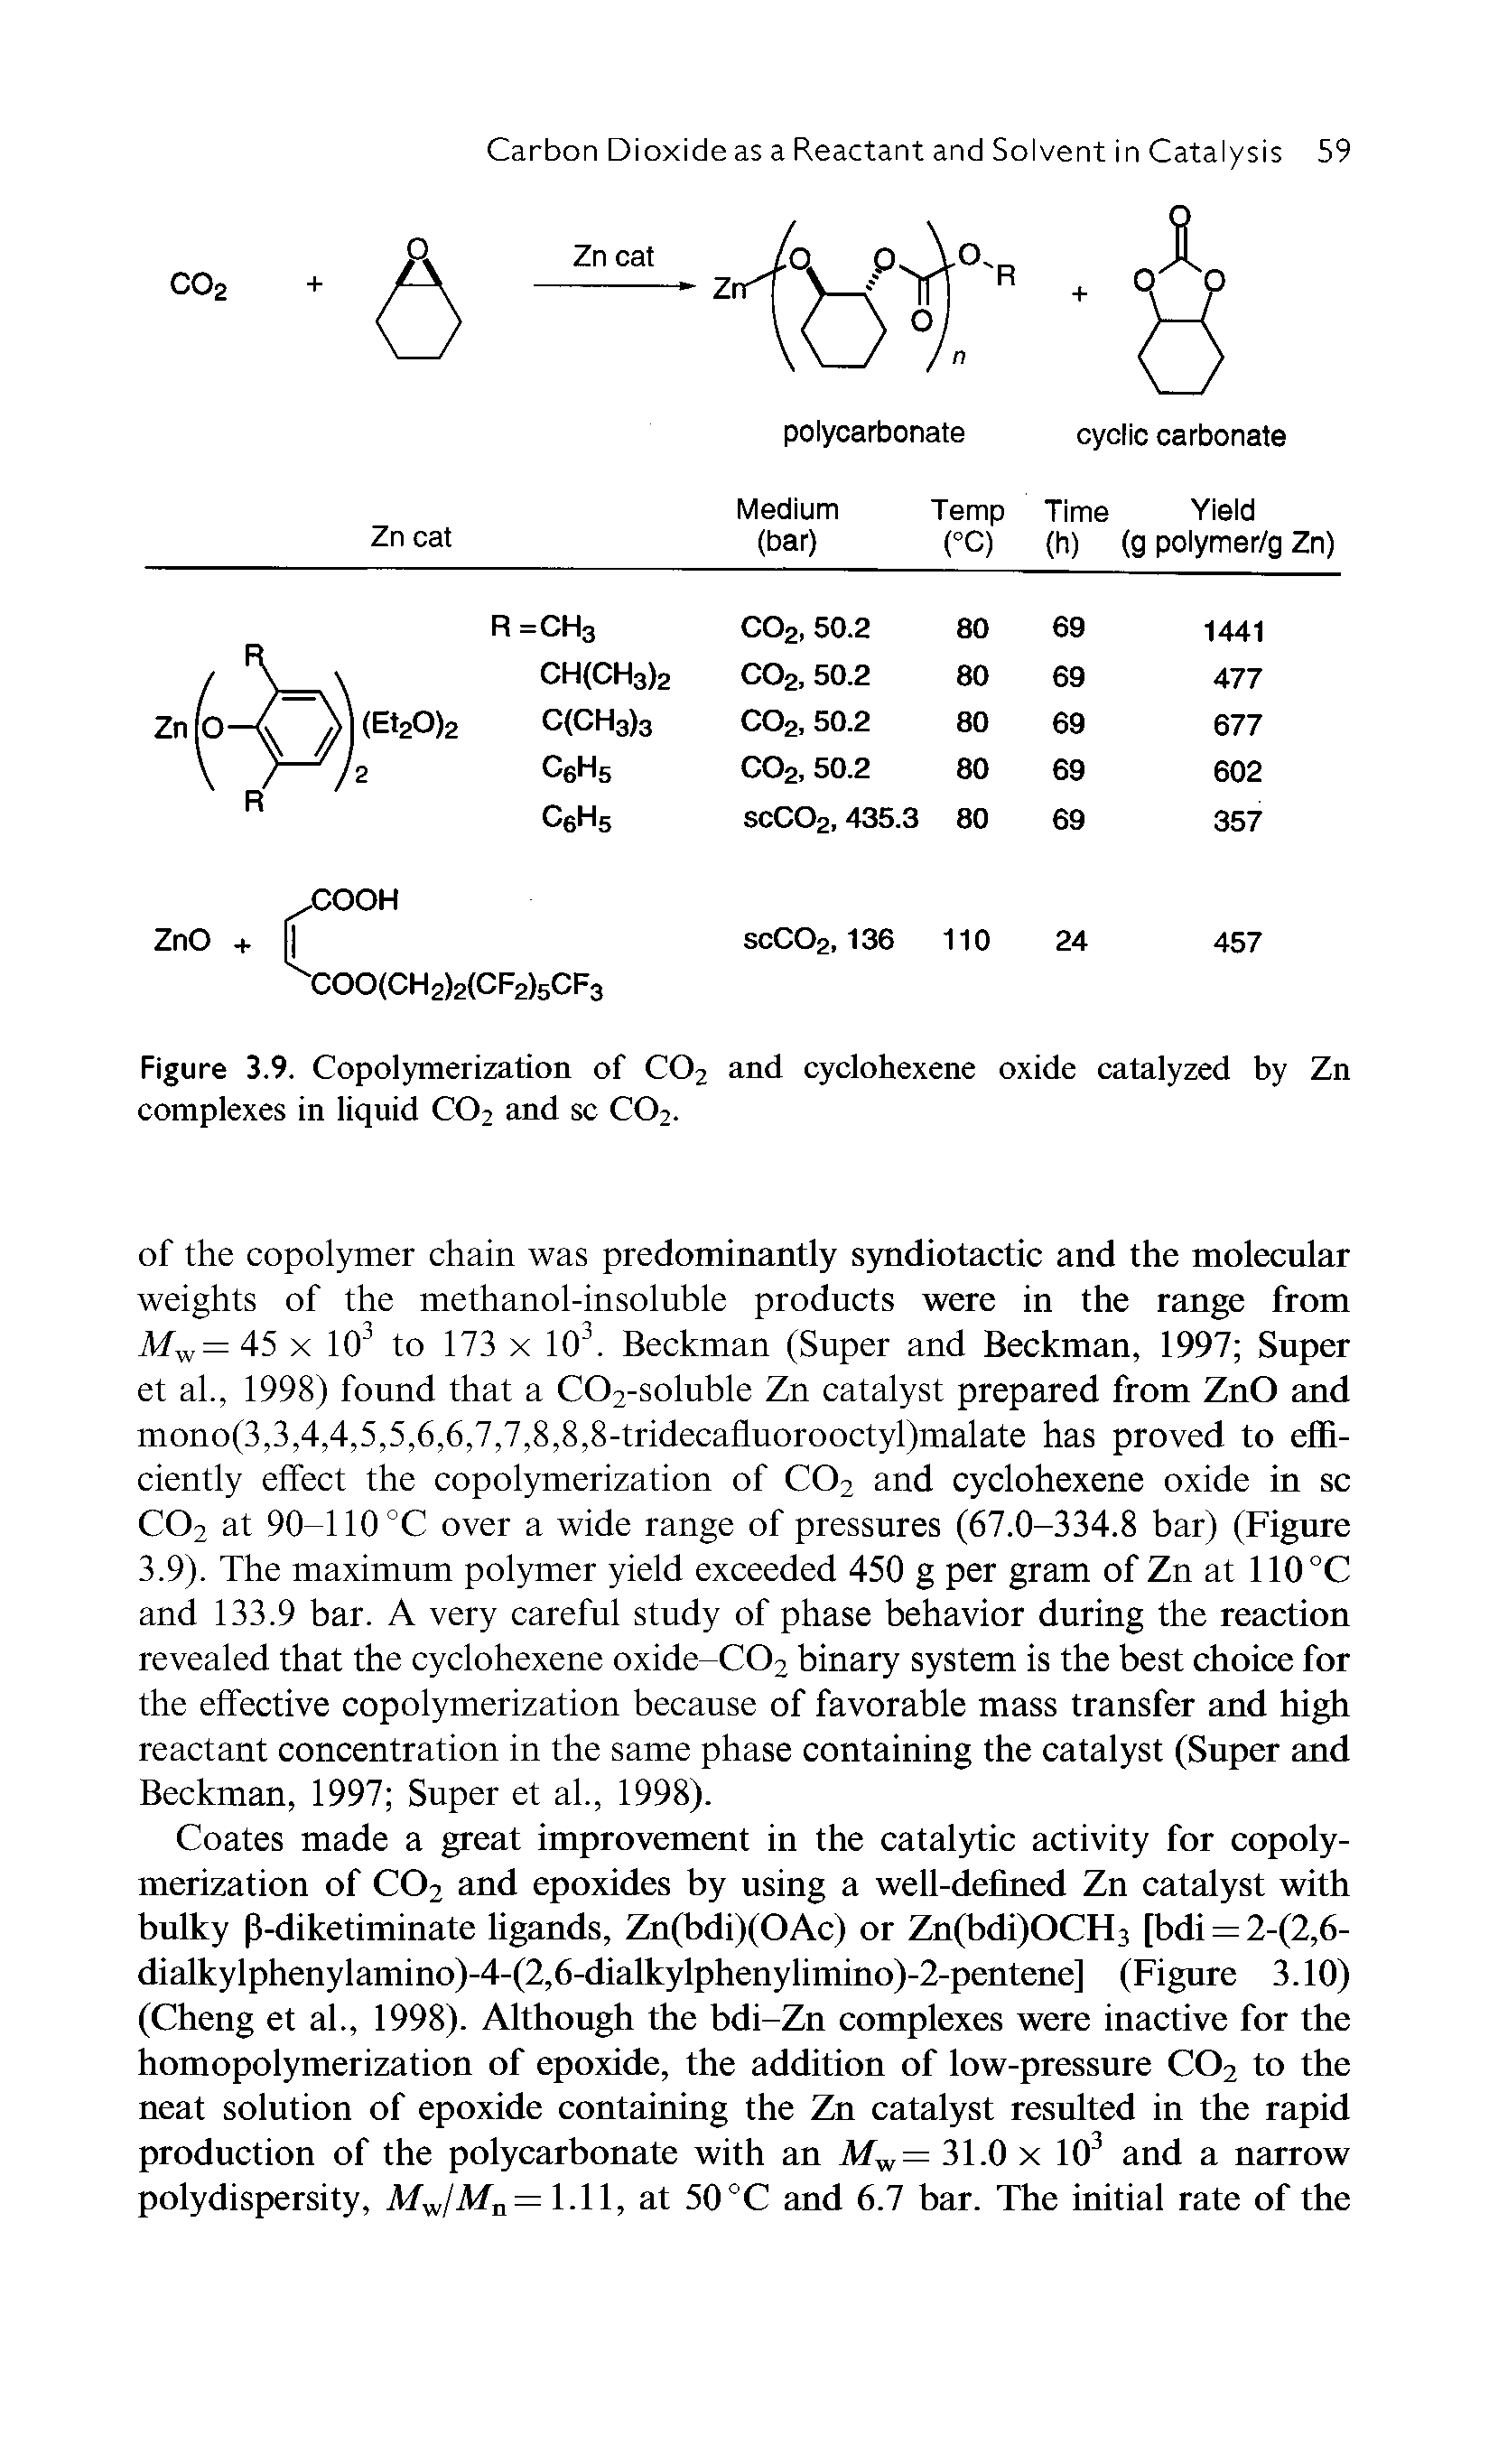 Figure 3.9. Copolymerization of COz and cyclohexene oxide catalyzed by Zn complexes in liquid C02 and sc C02.